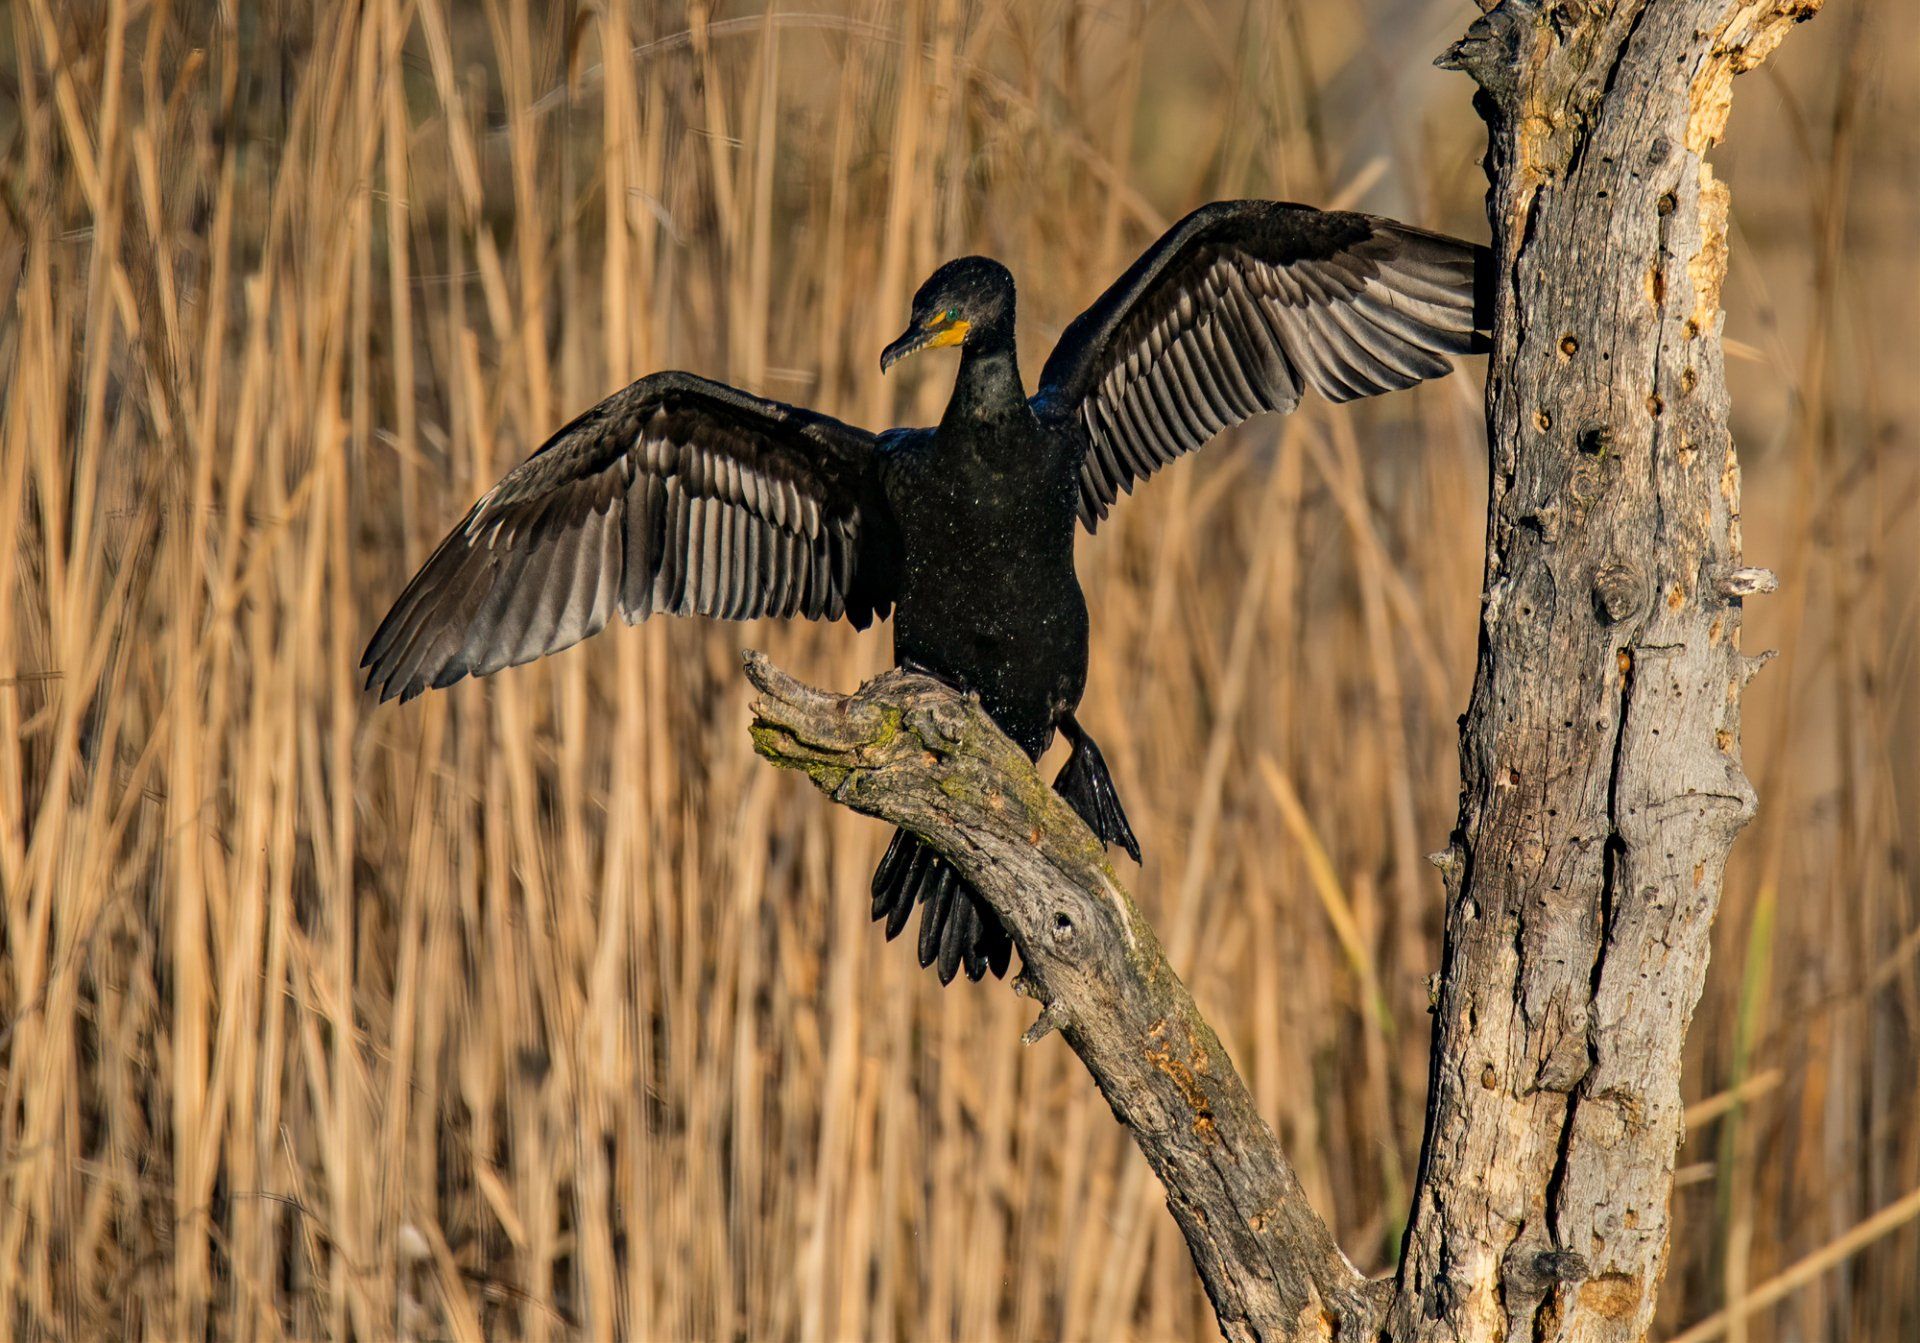 Cormorant drying its wings.